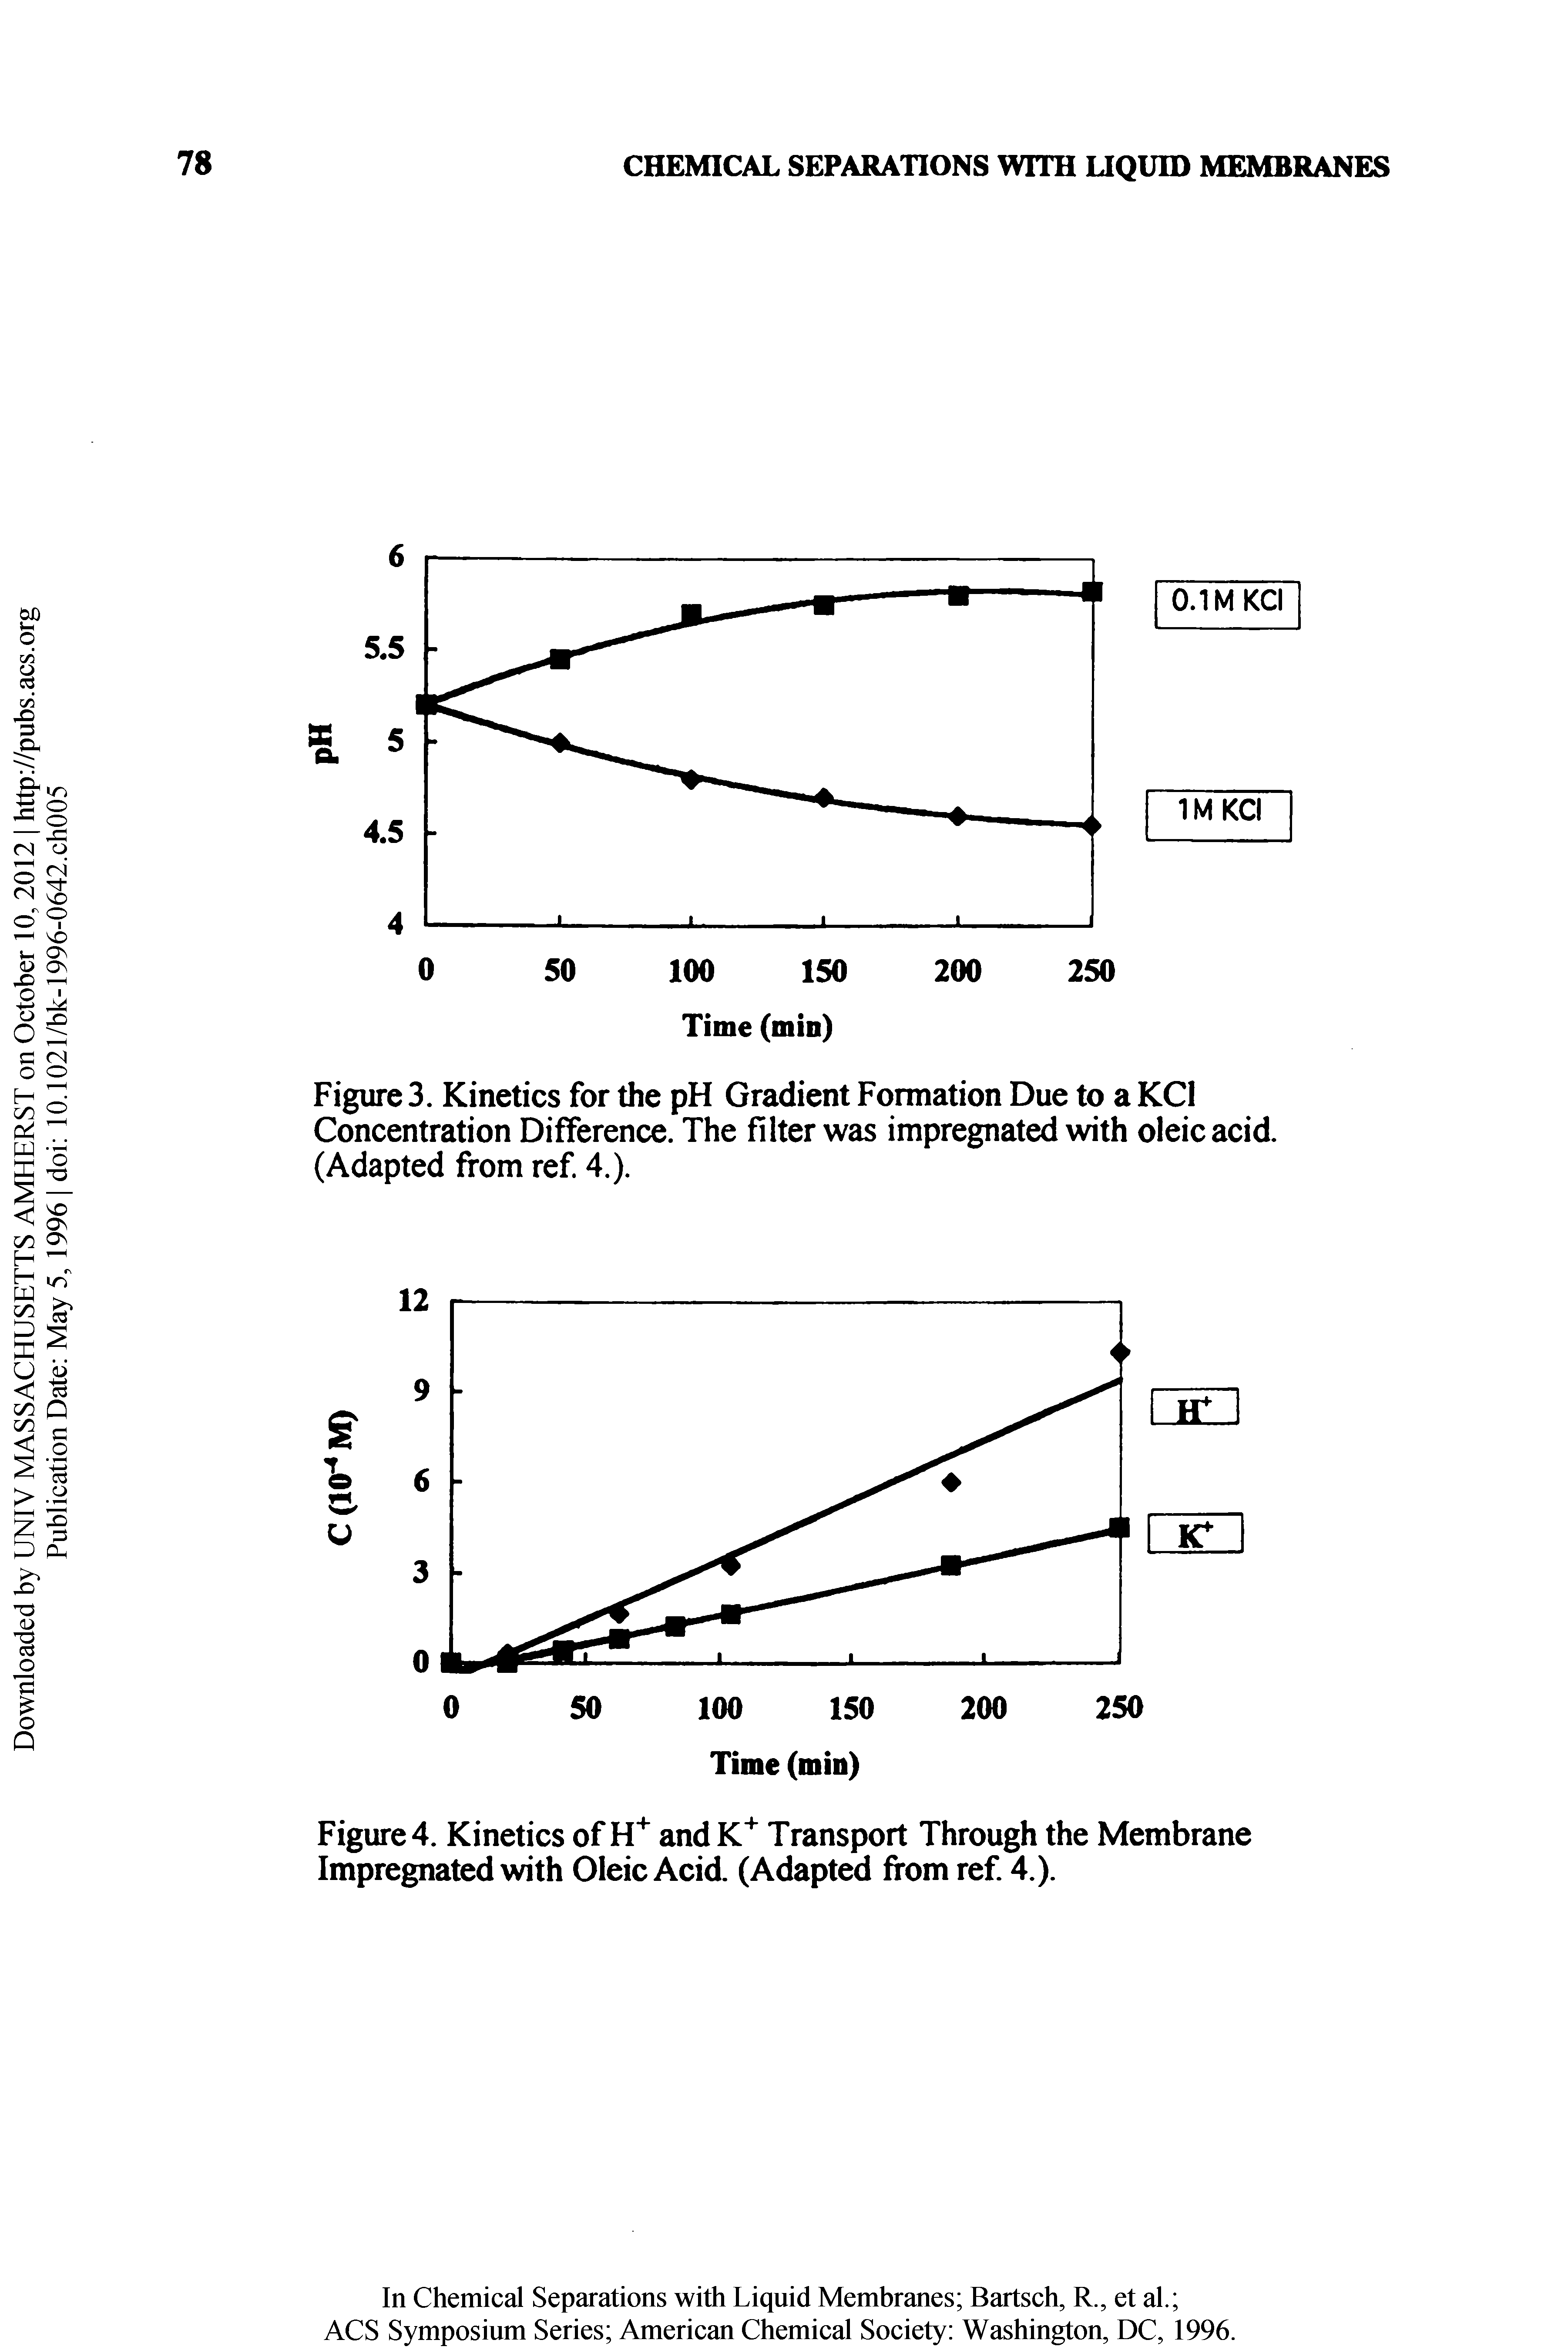 Figure 3. Kinetics for the pH Gradient Formation Due to a KCl Concentration Difference. The filter was impregnated with oleic acid (Adapted from ref 4.).